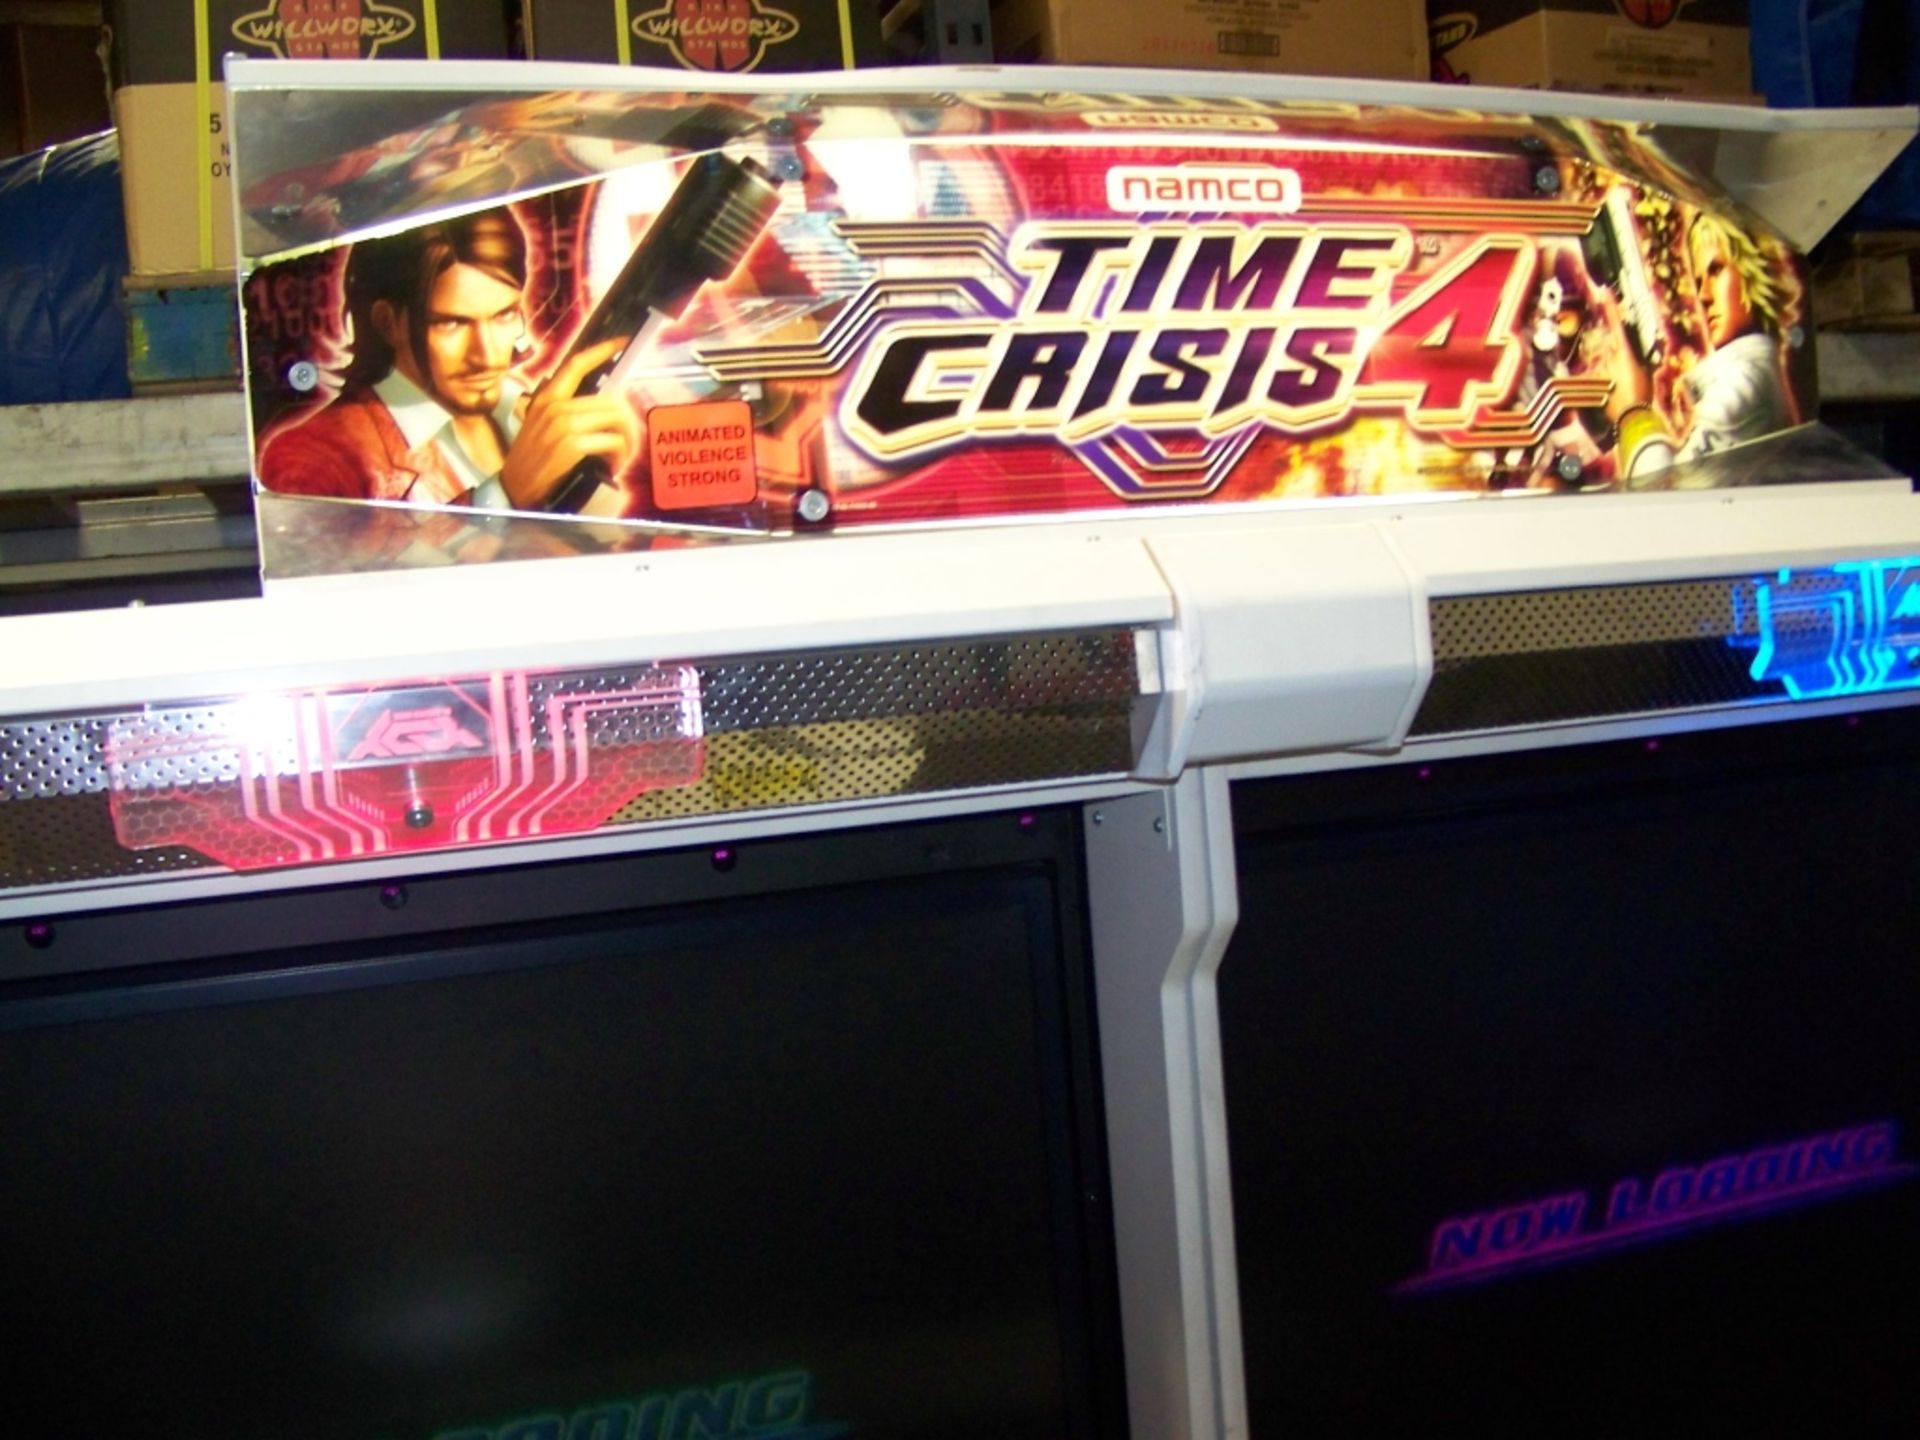 TIME CRISIS 4 TWIN 50" DELUXE SHOOTER ARCADE NAMCO - Image 5 of 9